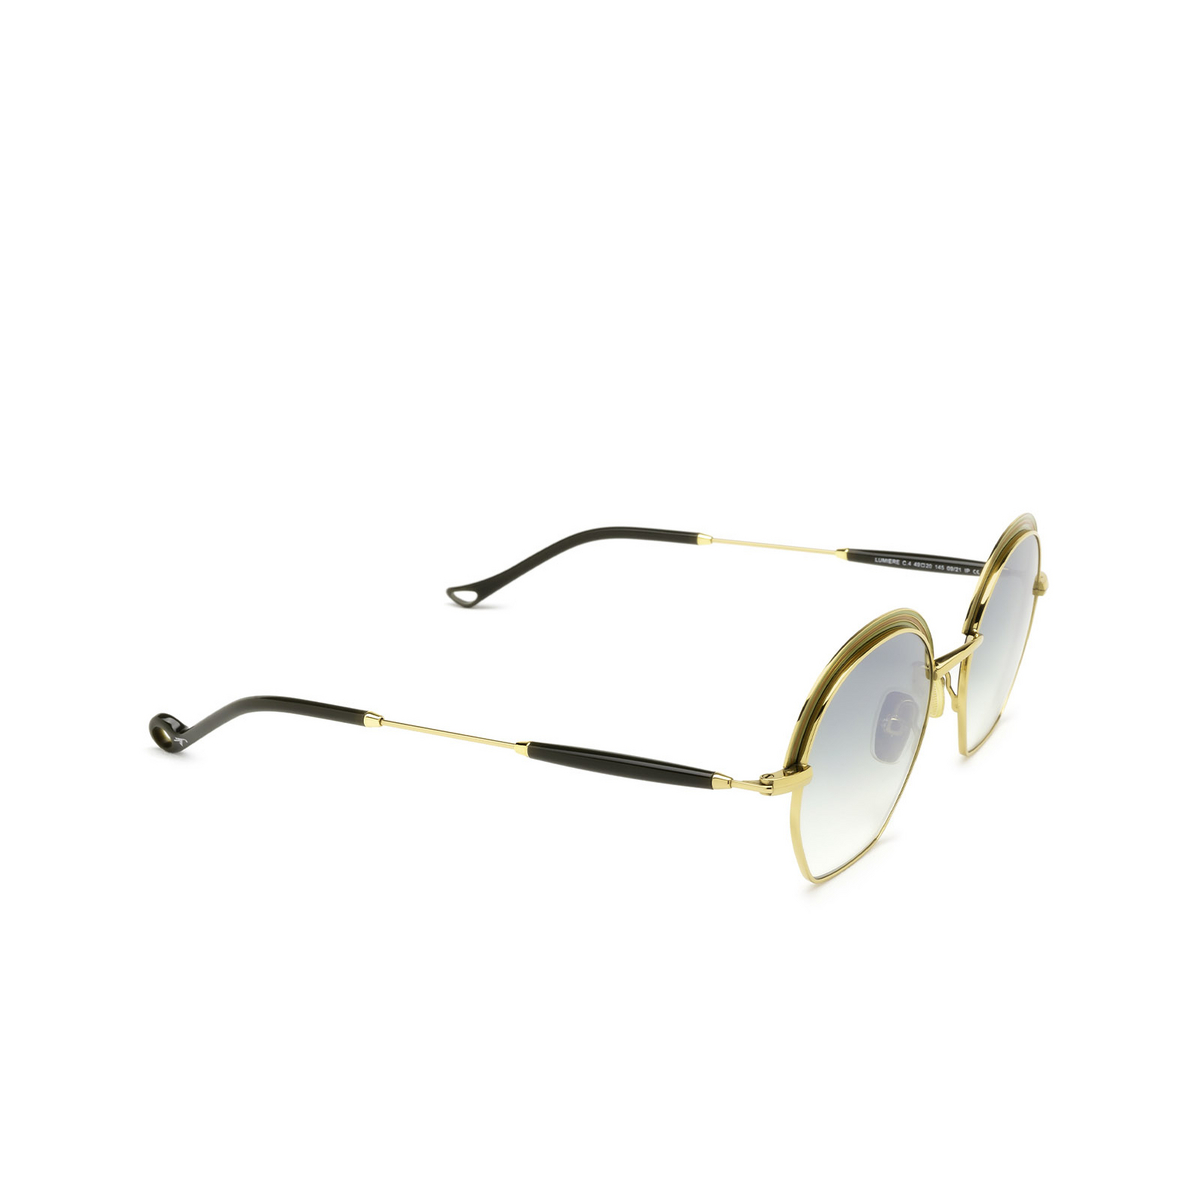 Eyepetizer® Irregular Sunglasses: Lumiere Sun color Green And Gold C.4-25F - three-quarters view.